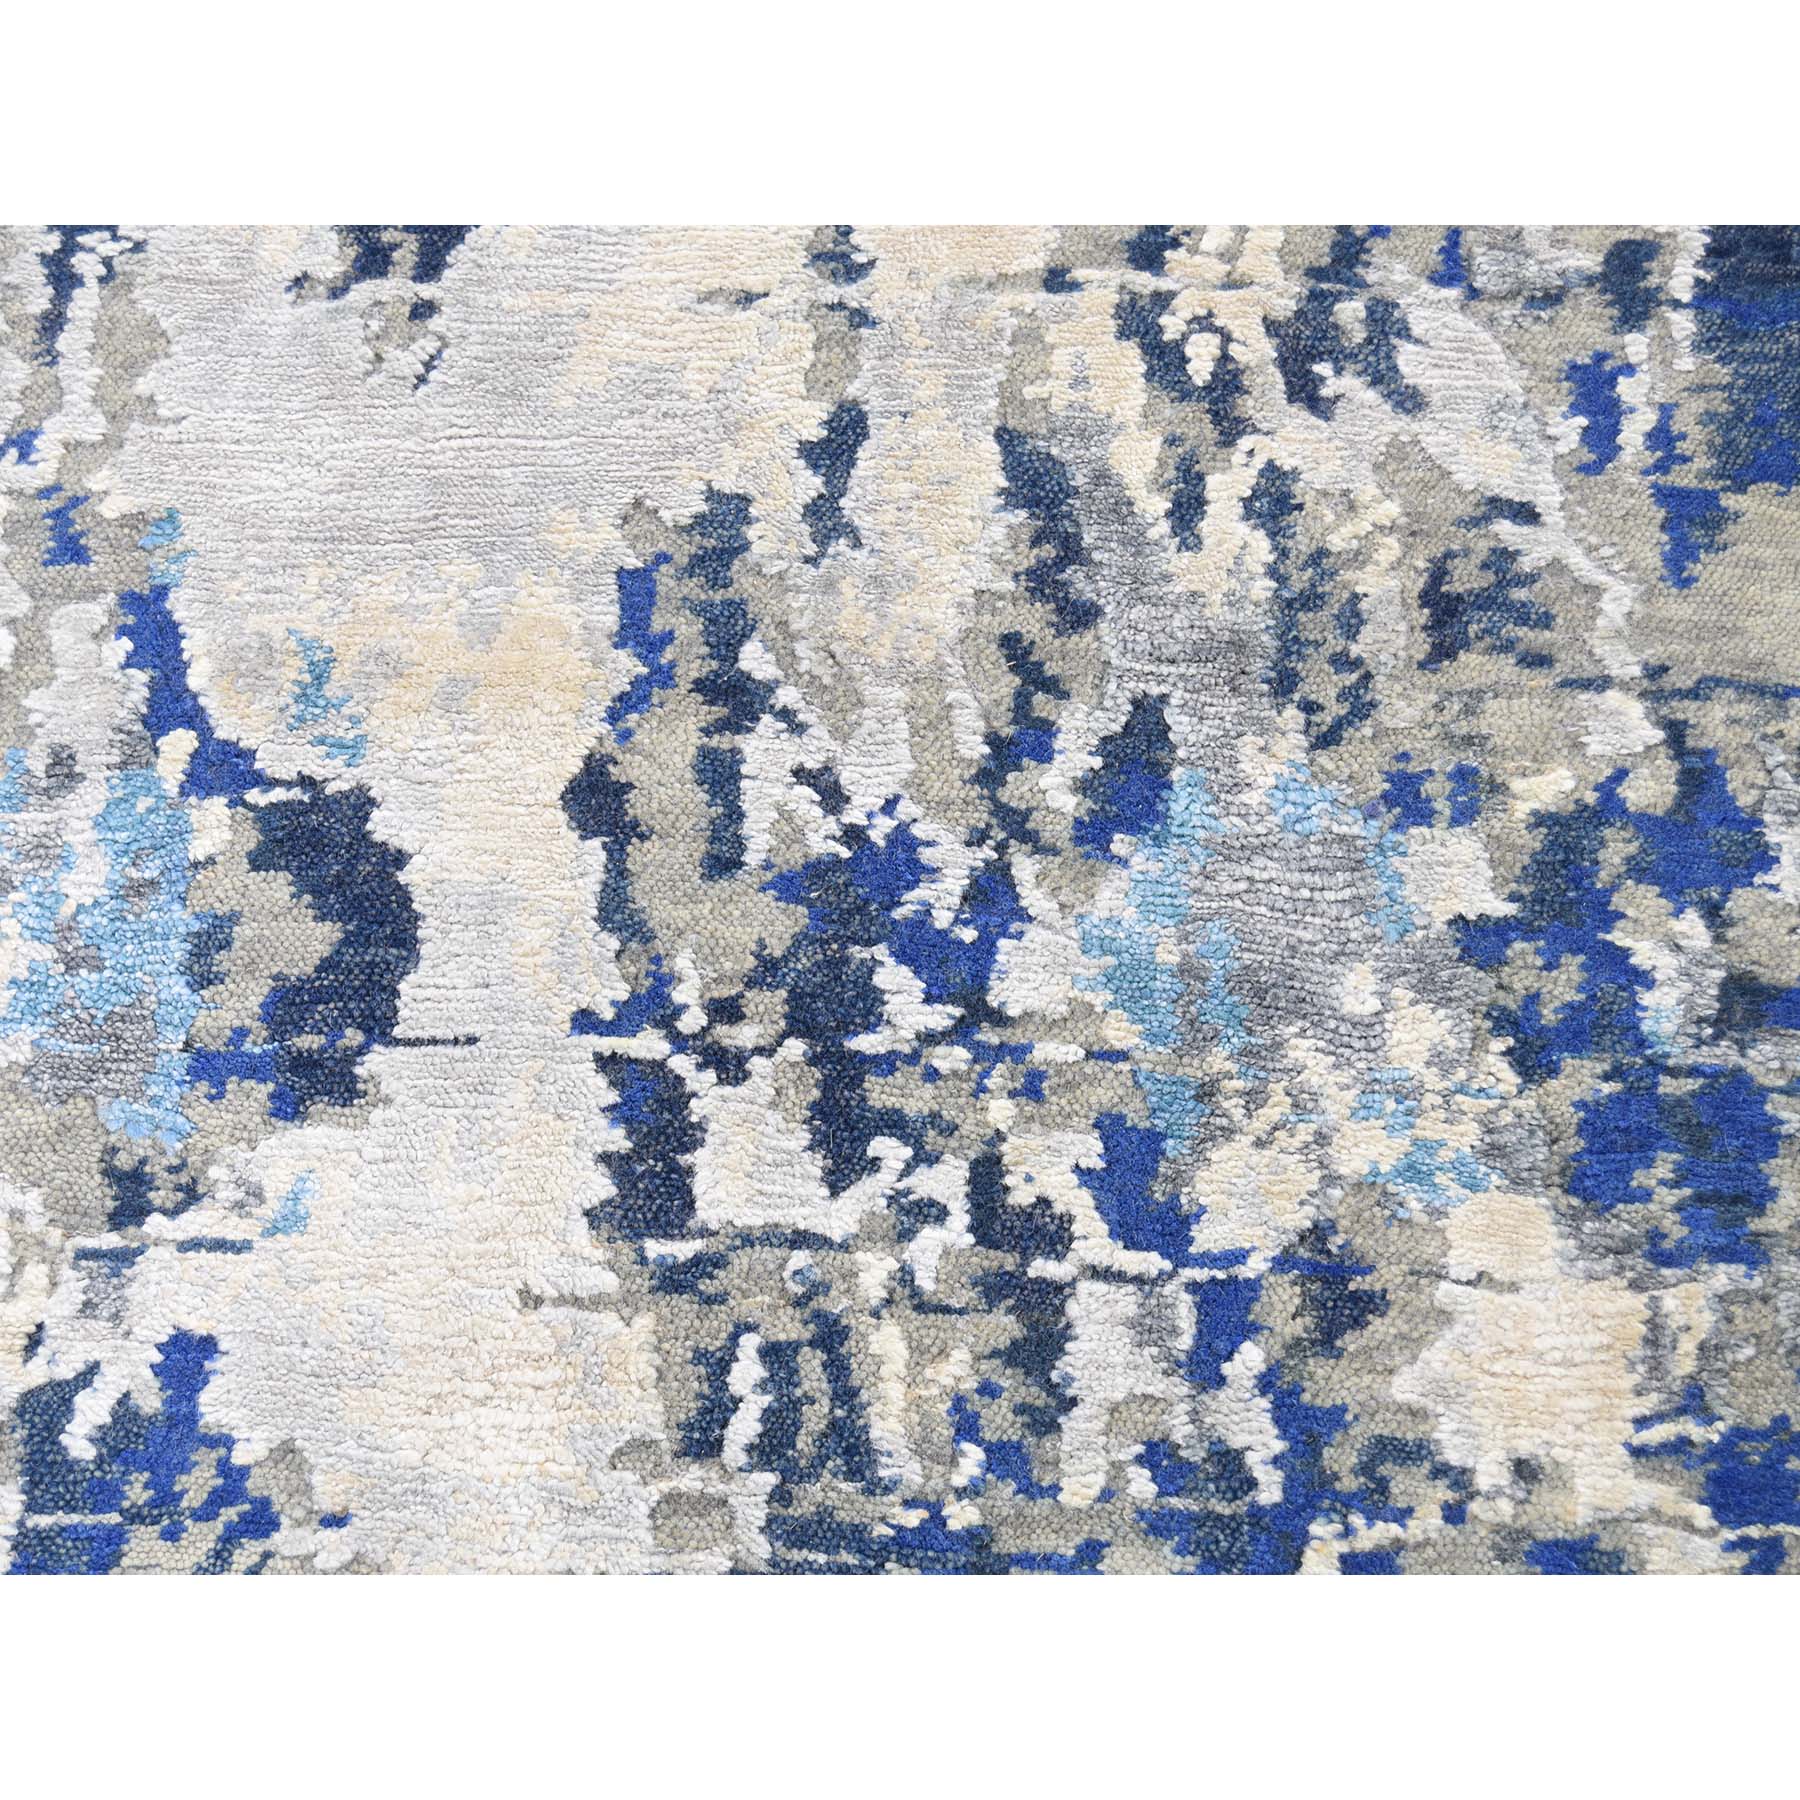 6-x9-1  Abstract Design Hi-Low Pile Wool And Silk Hand-Knotted Modern Rug 